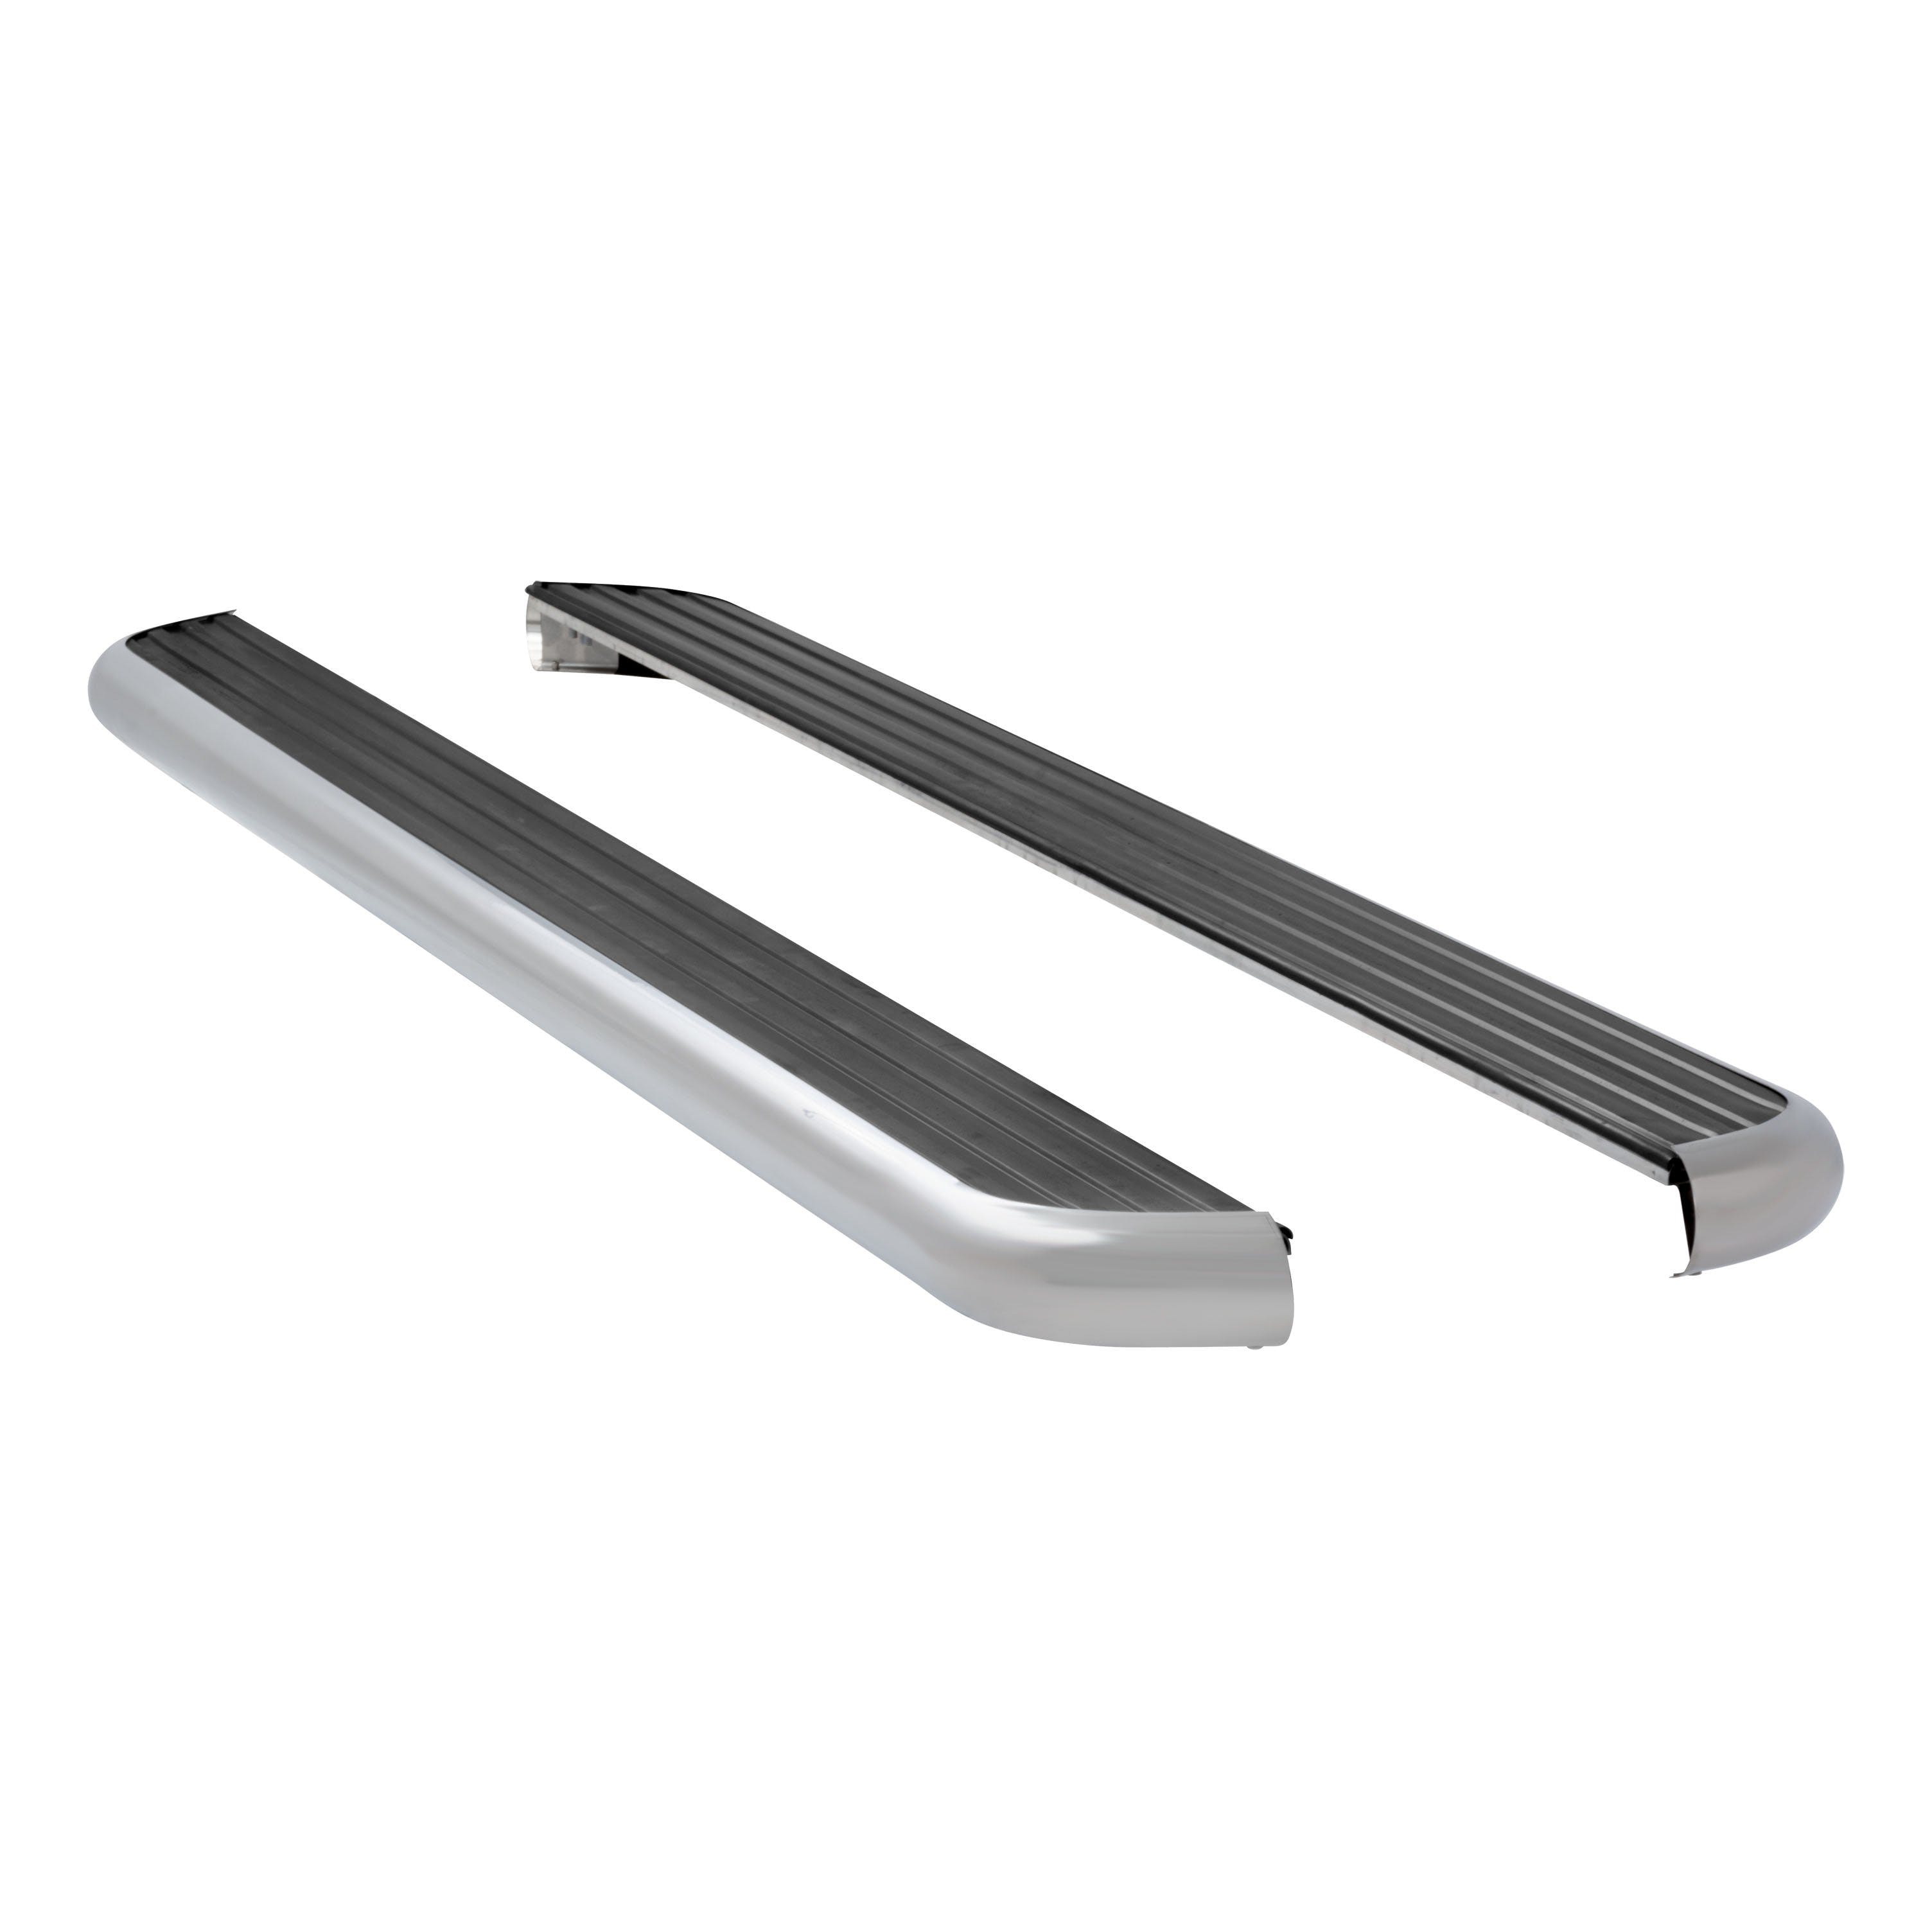 LUVERNE 575114-571448 MegaStep 6-1/2 inch Wheel-to-Wheel Running Boards, Polished Stainless